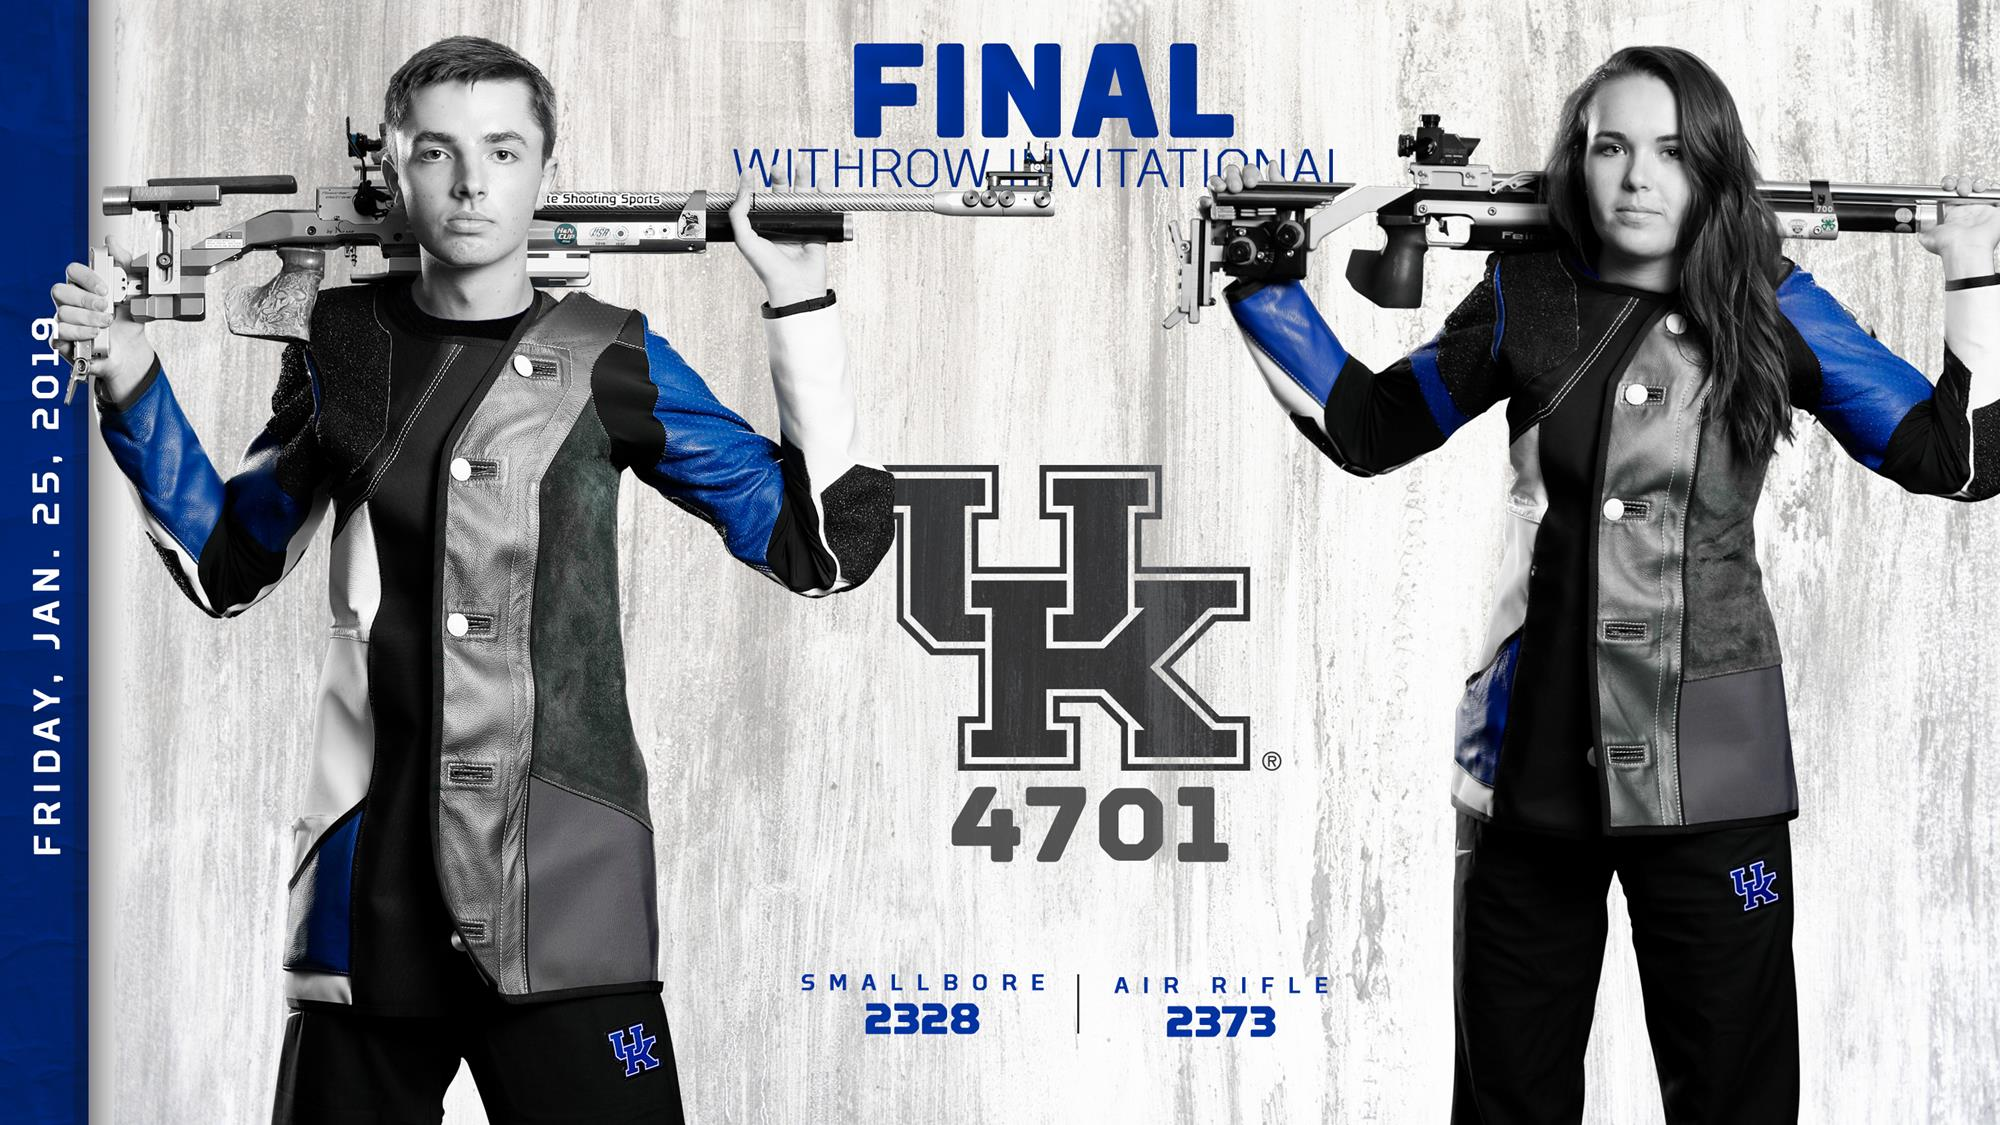 UK Rifle Fires 4701 at Withrow Invitational